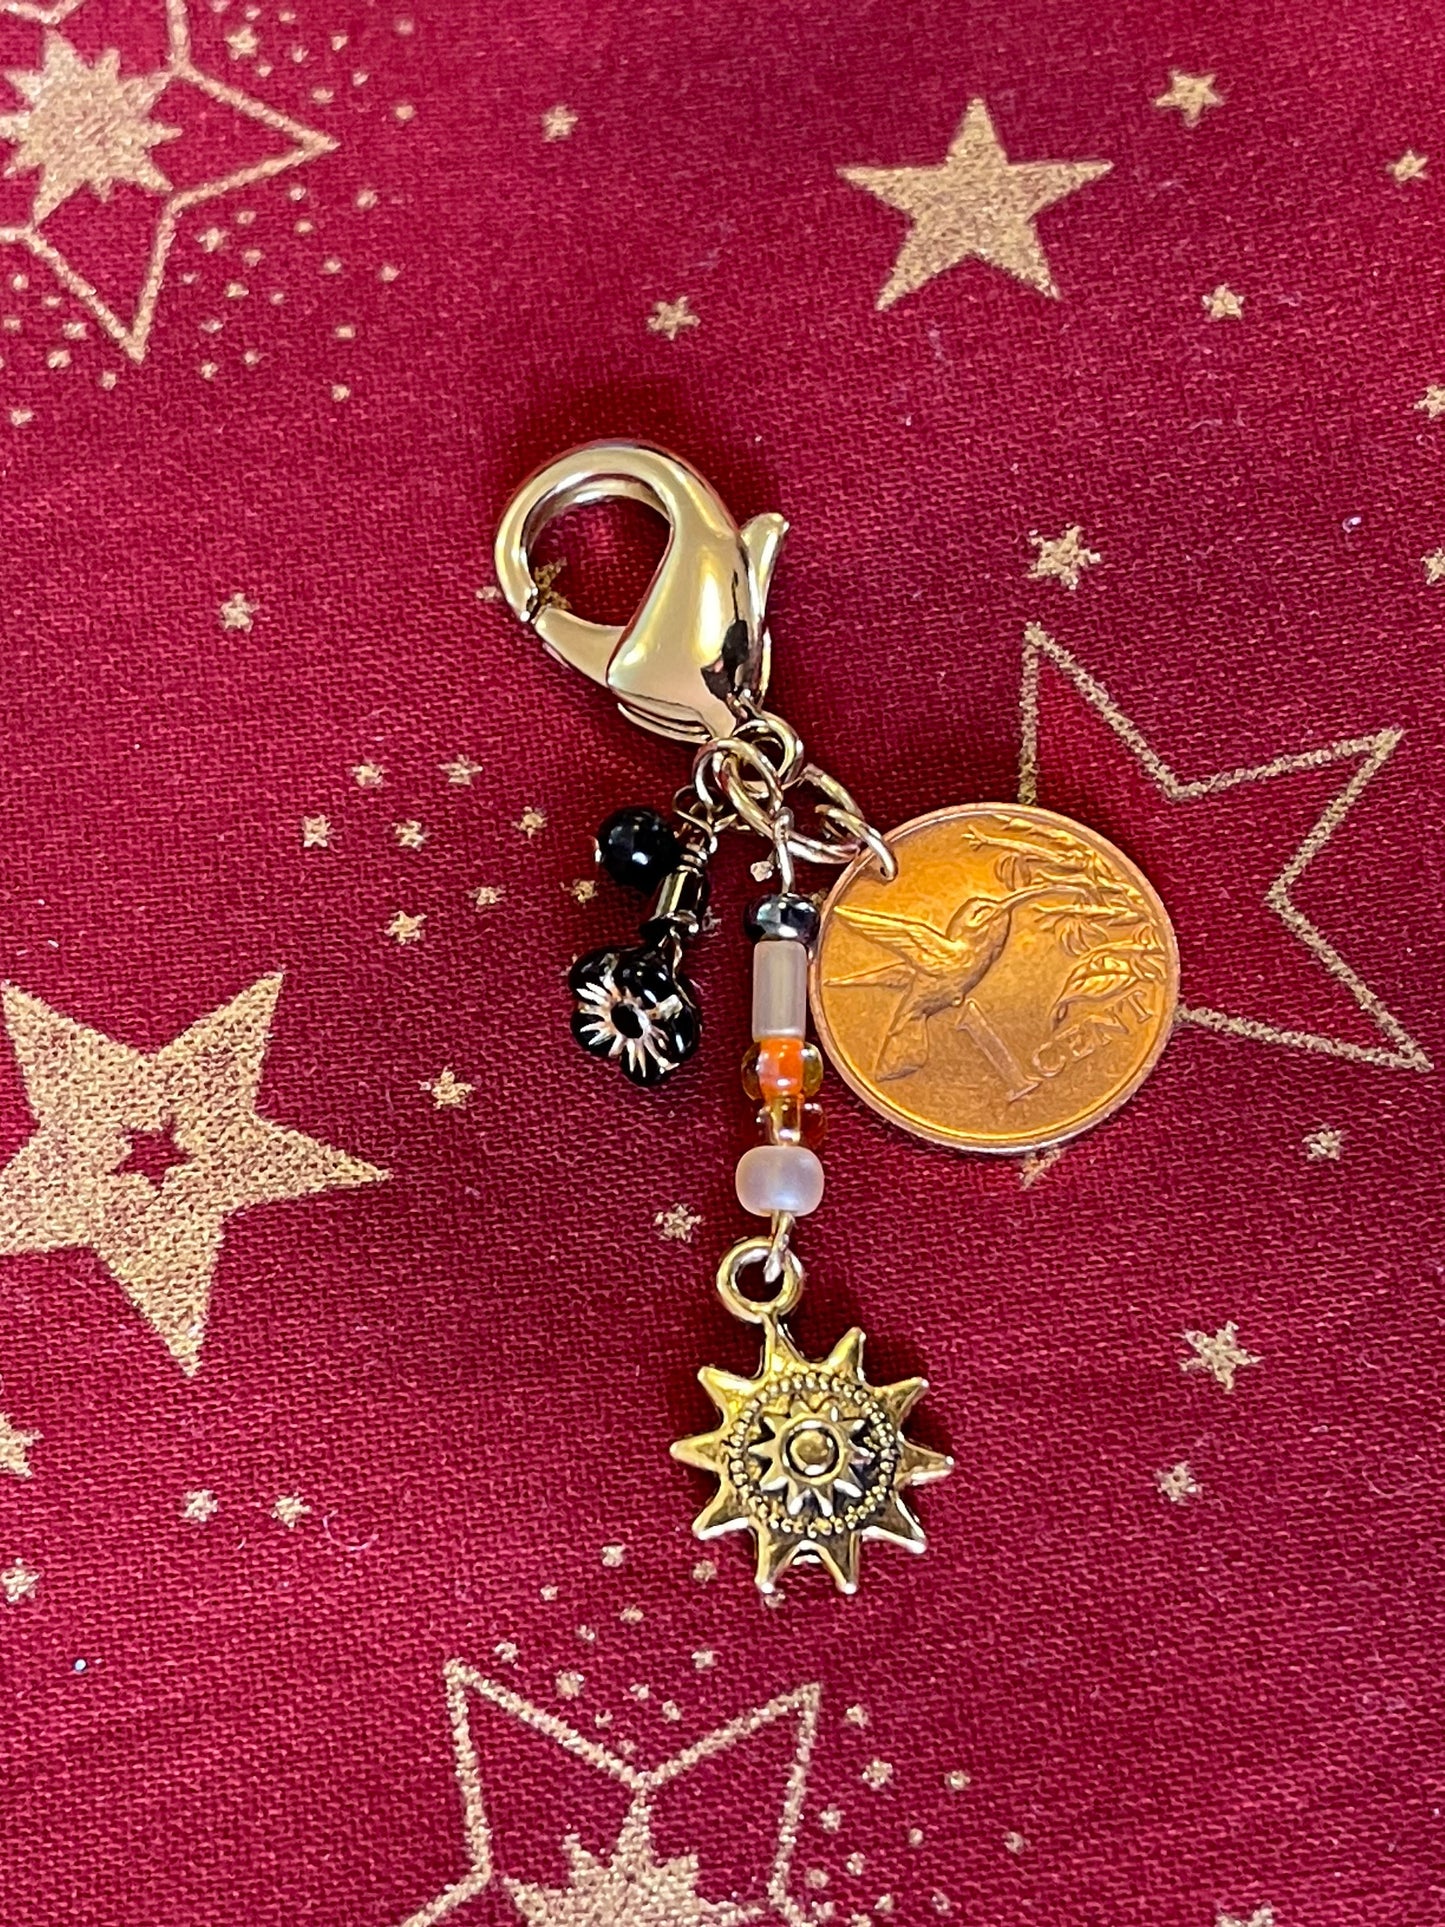 Hummingbird coin gold plated chunky accessory clip–flower and sun charm–purse or zipper–vintage Japanese glass dangle drops–designer jewelry